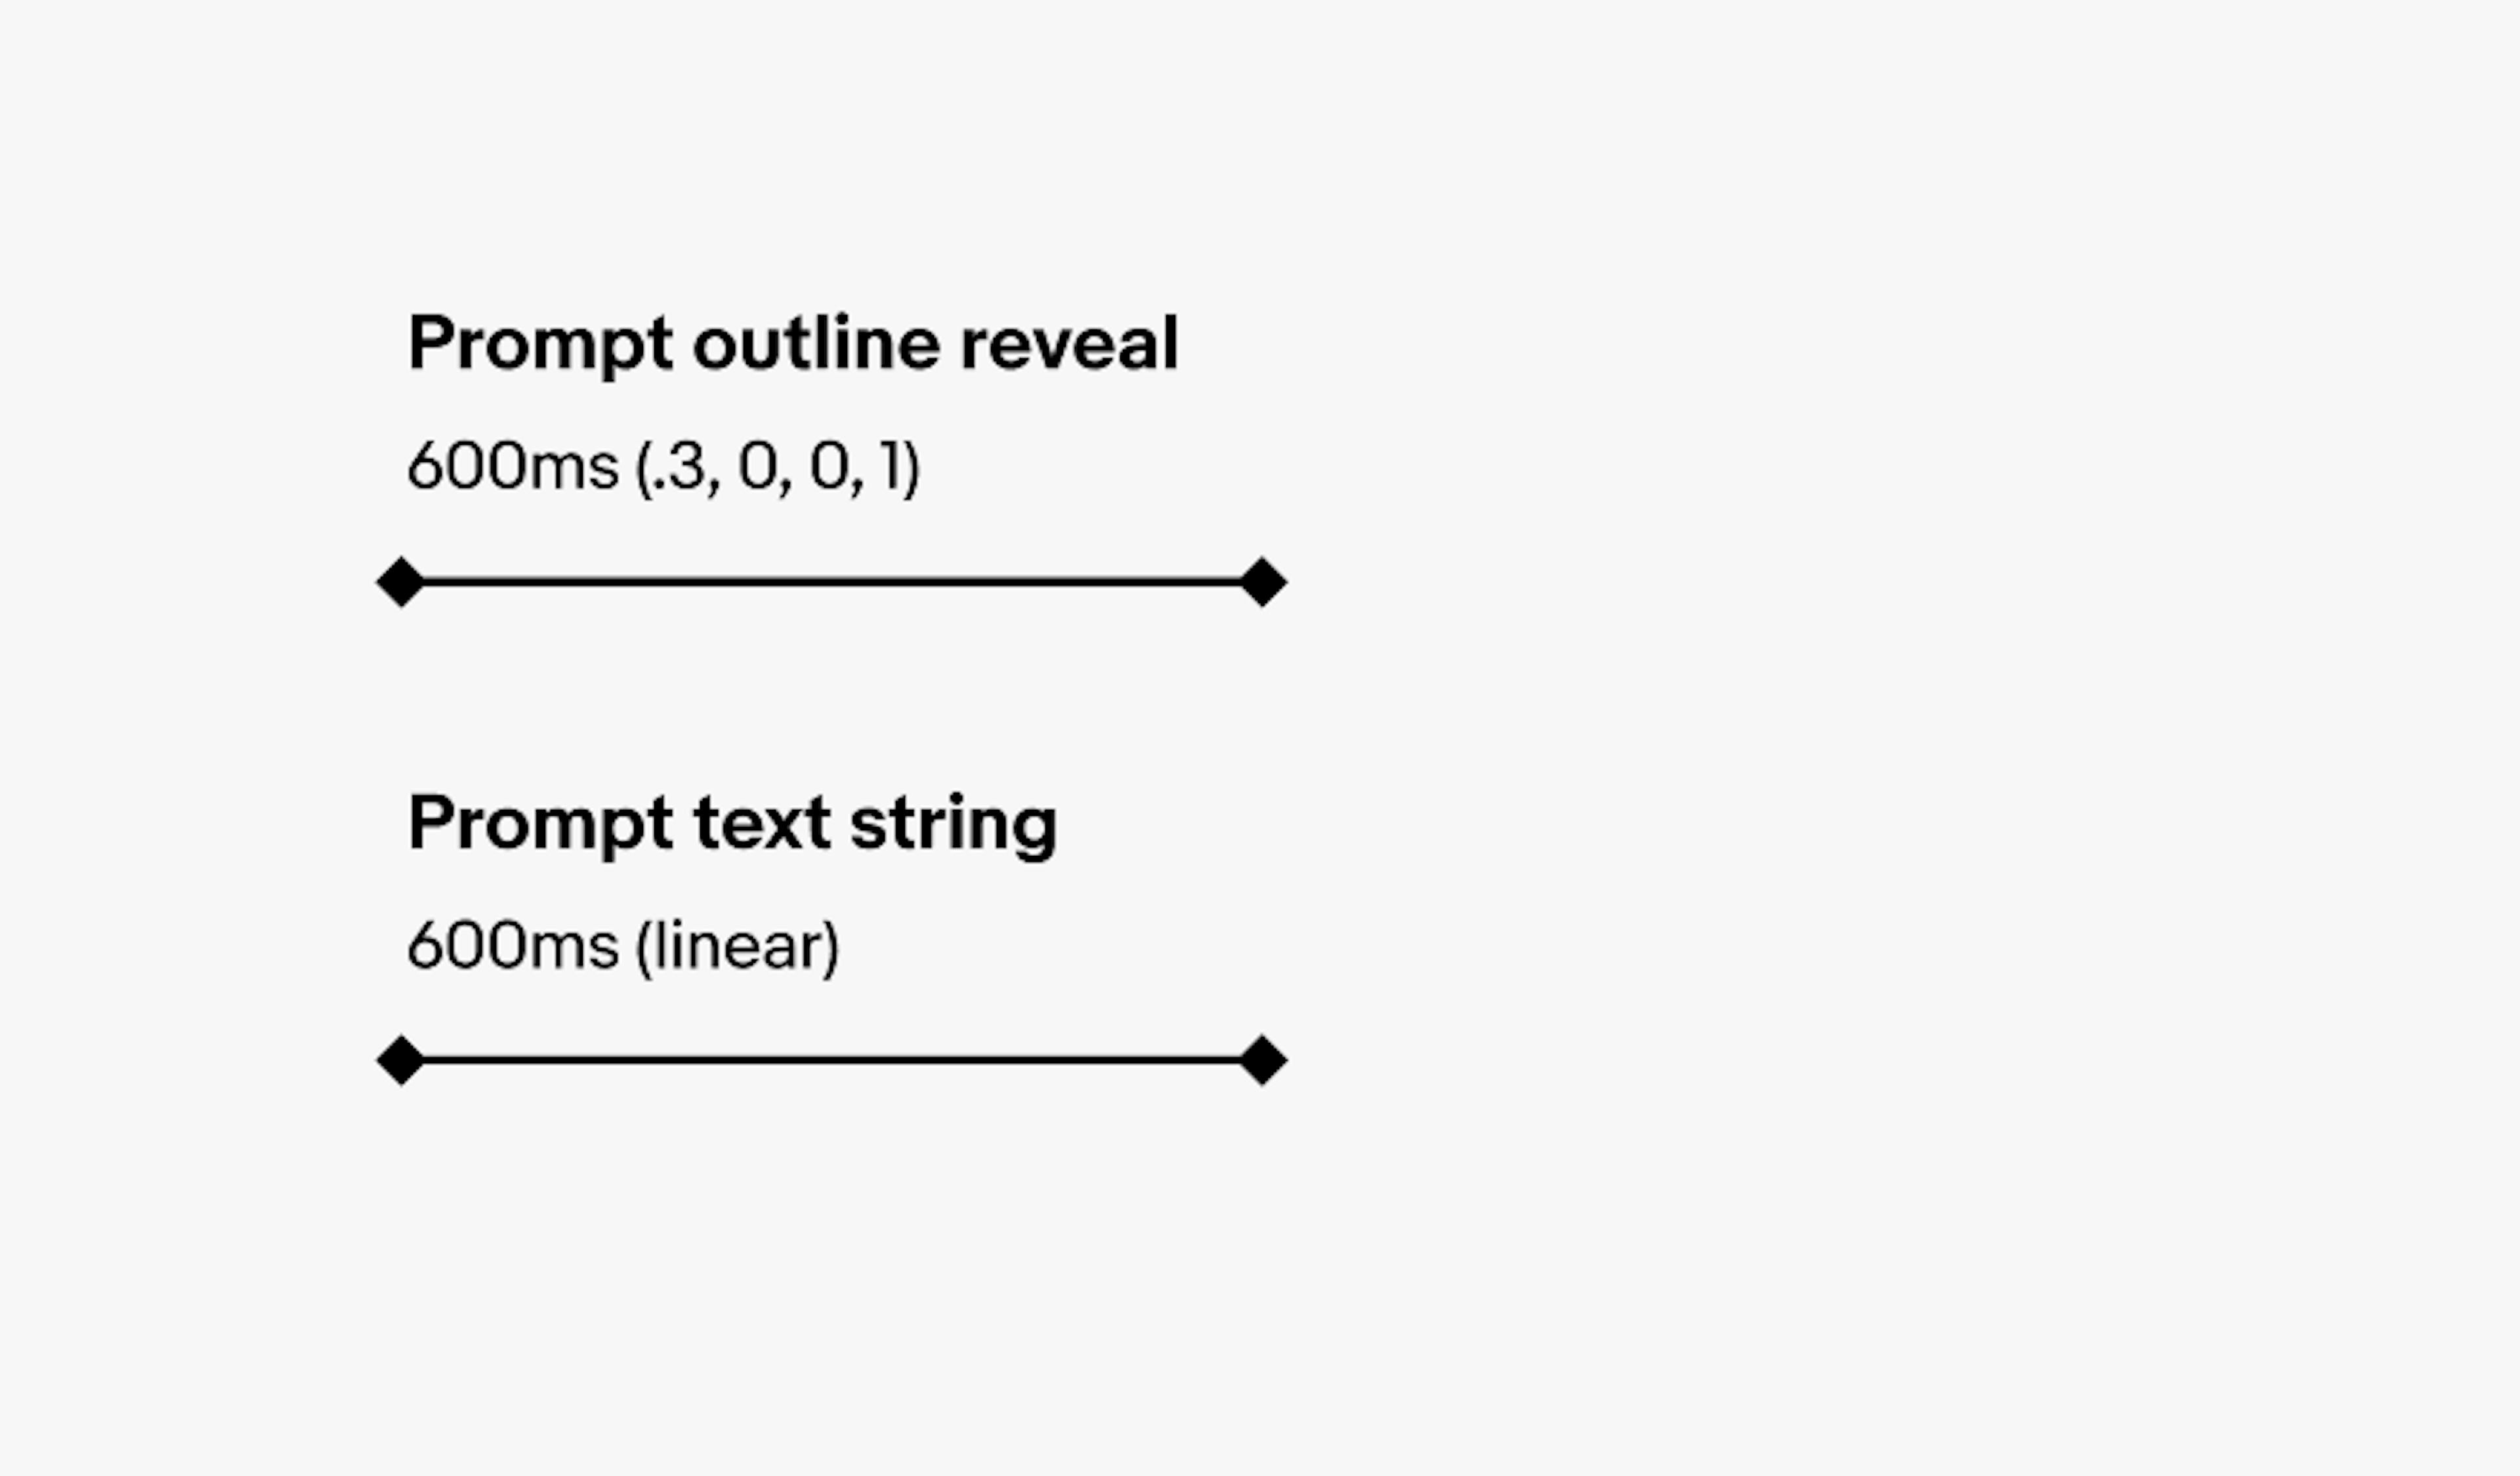 Two motion timeline graphics. The first is for prompt outline reveal 600ms (.3, 0, 0, 1). The second is for prompt text string 600ms (linear).